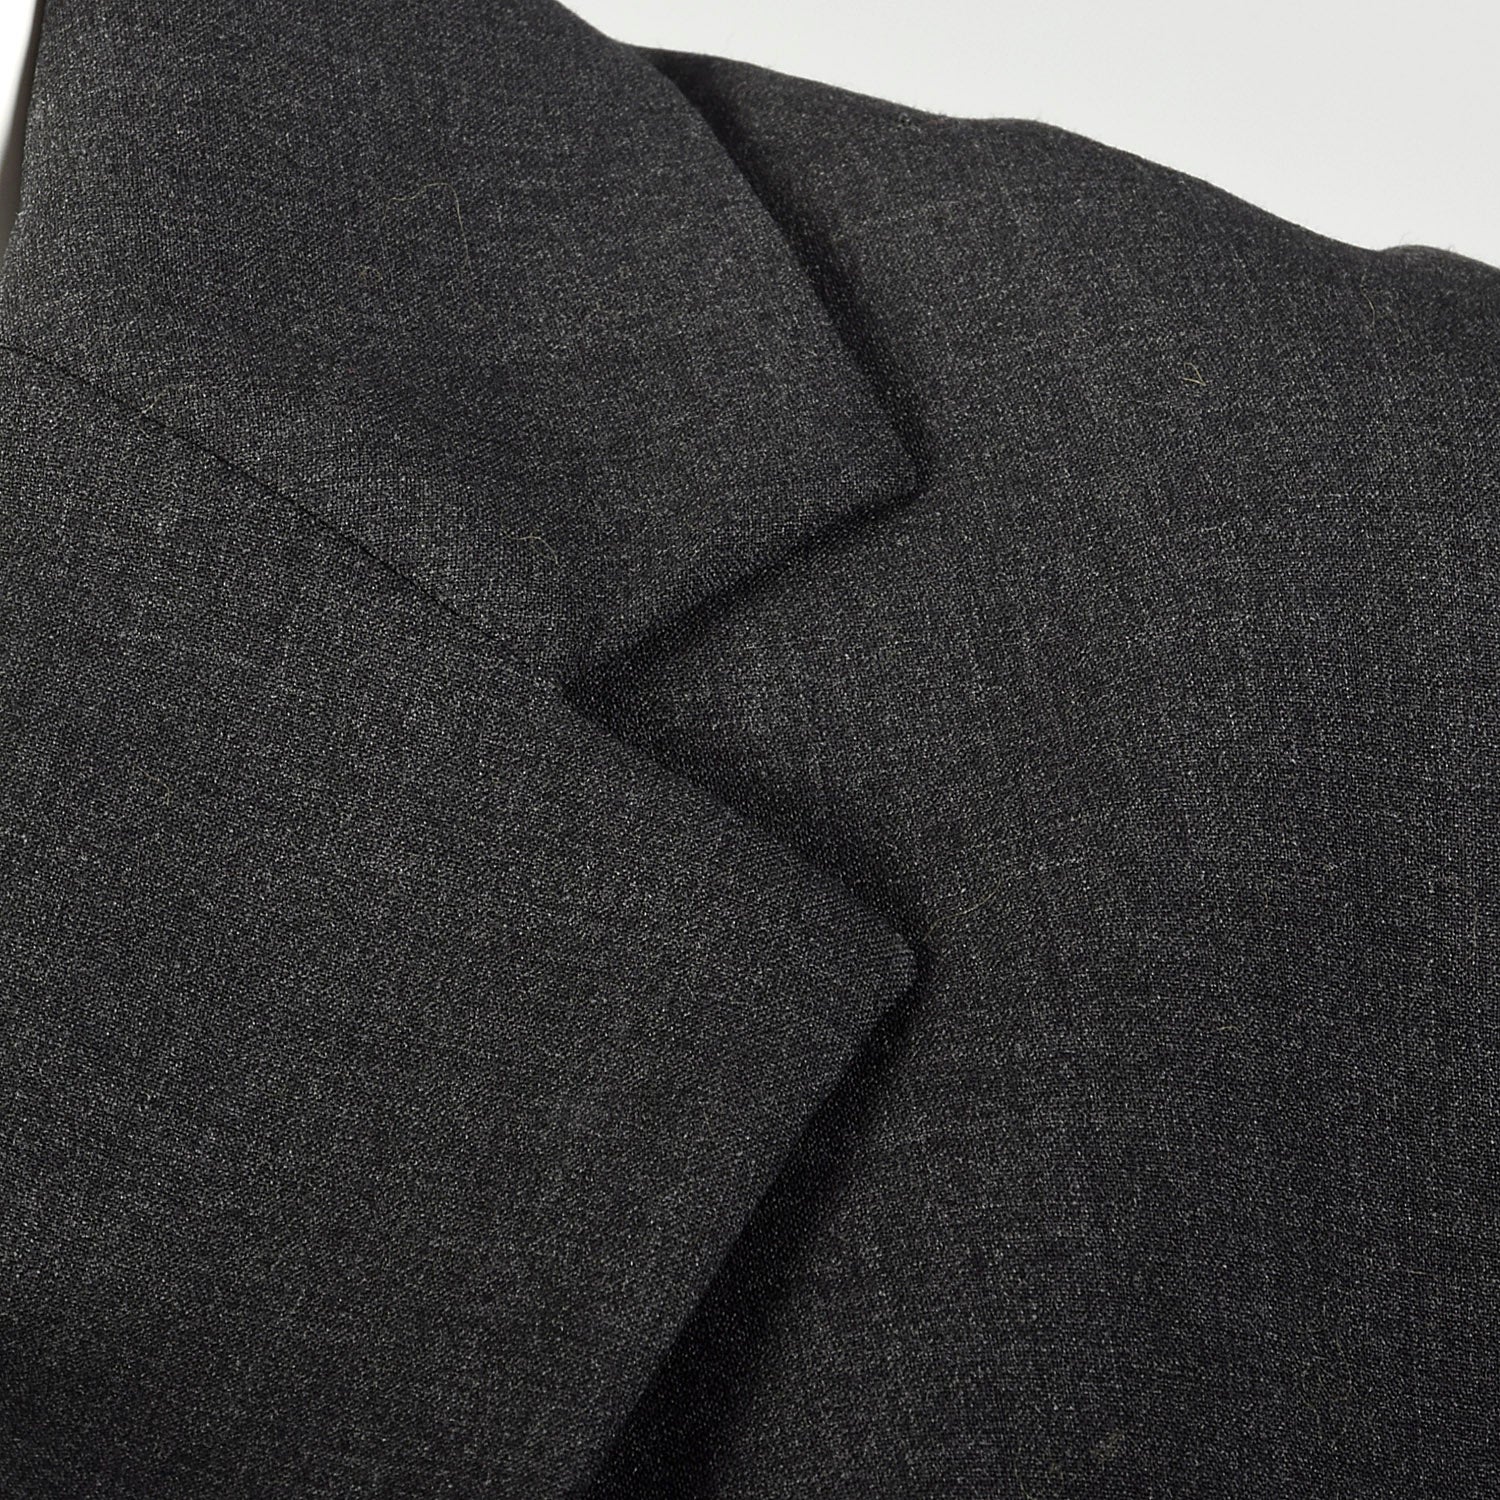 Small 1990s Celine Pant Suit Charcoal Gray Business Wear To Work Extra Long Pants